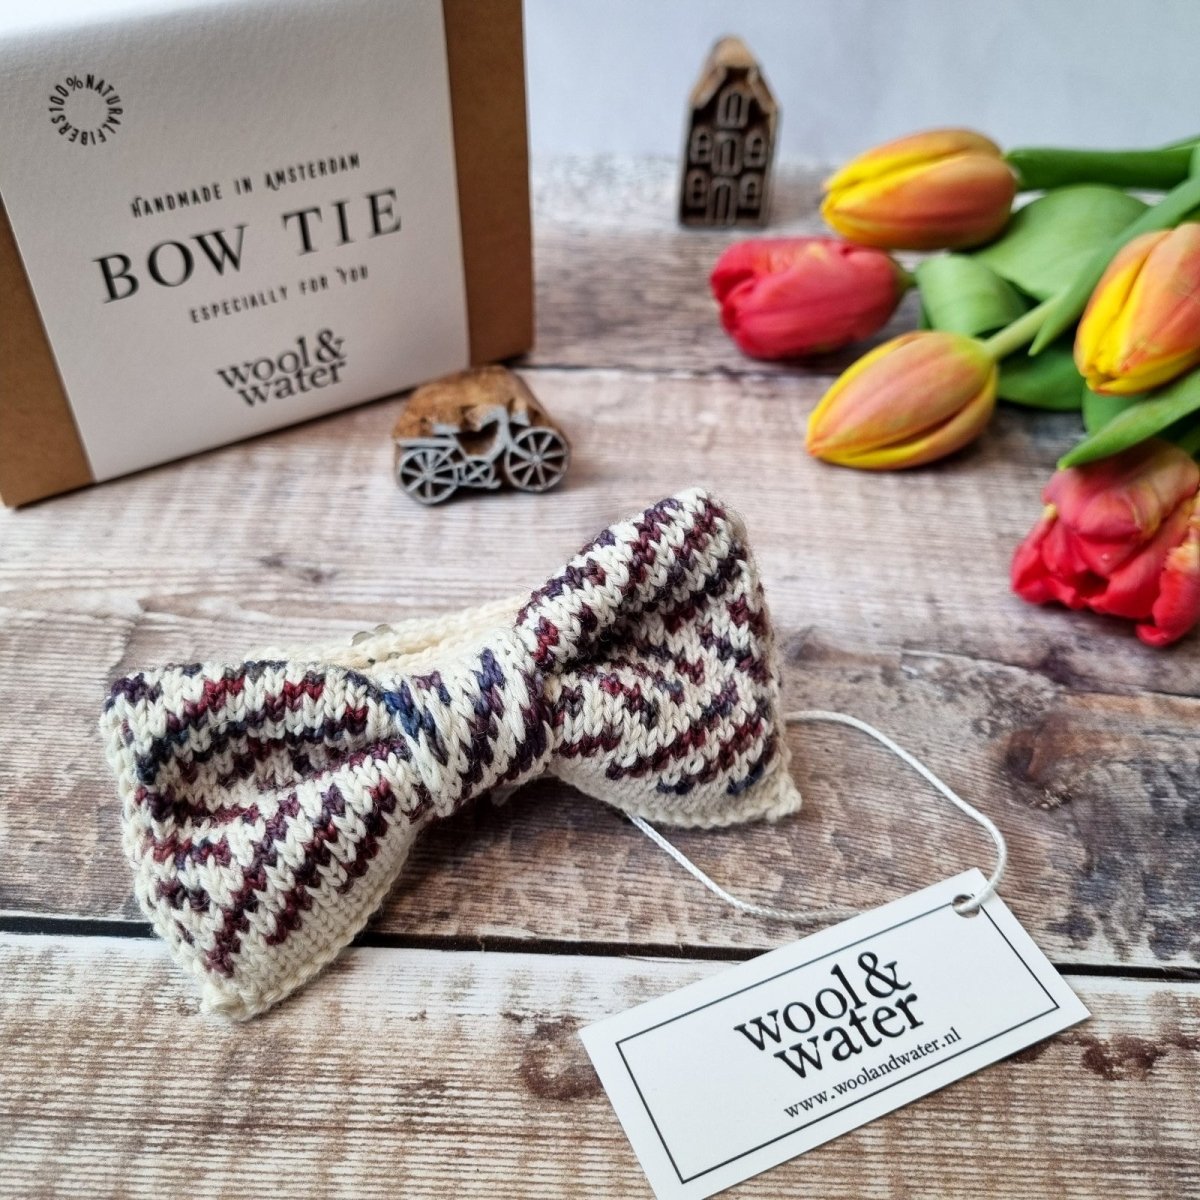 Autumn in Amsterdam Bow Tie - Wool & Water